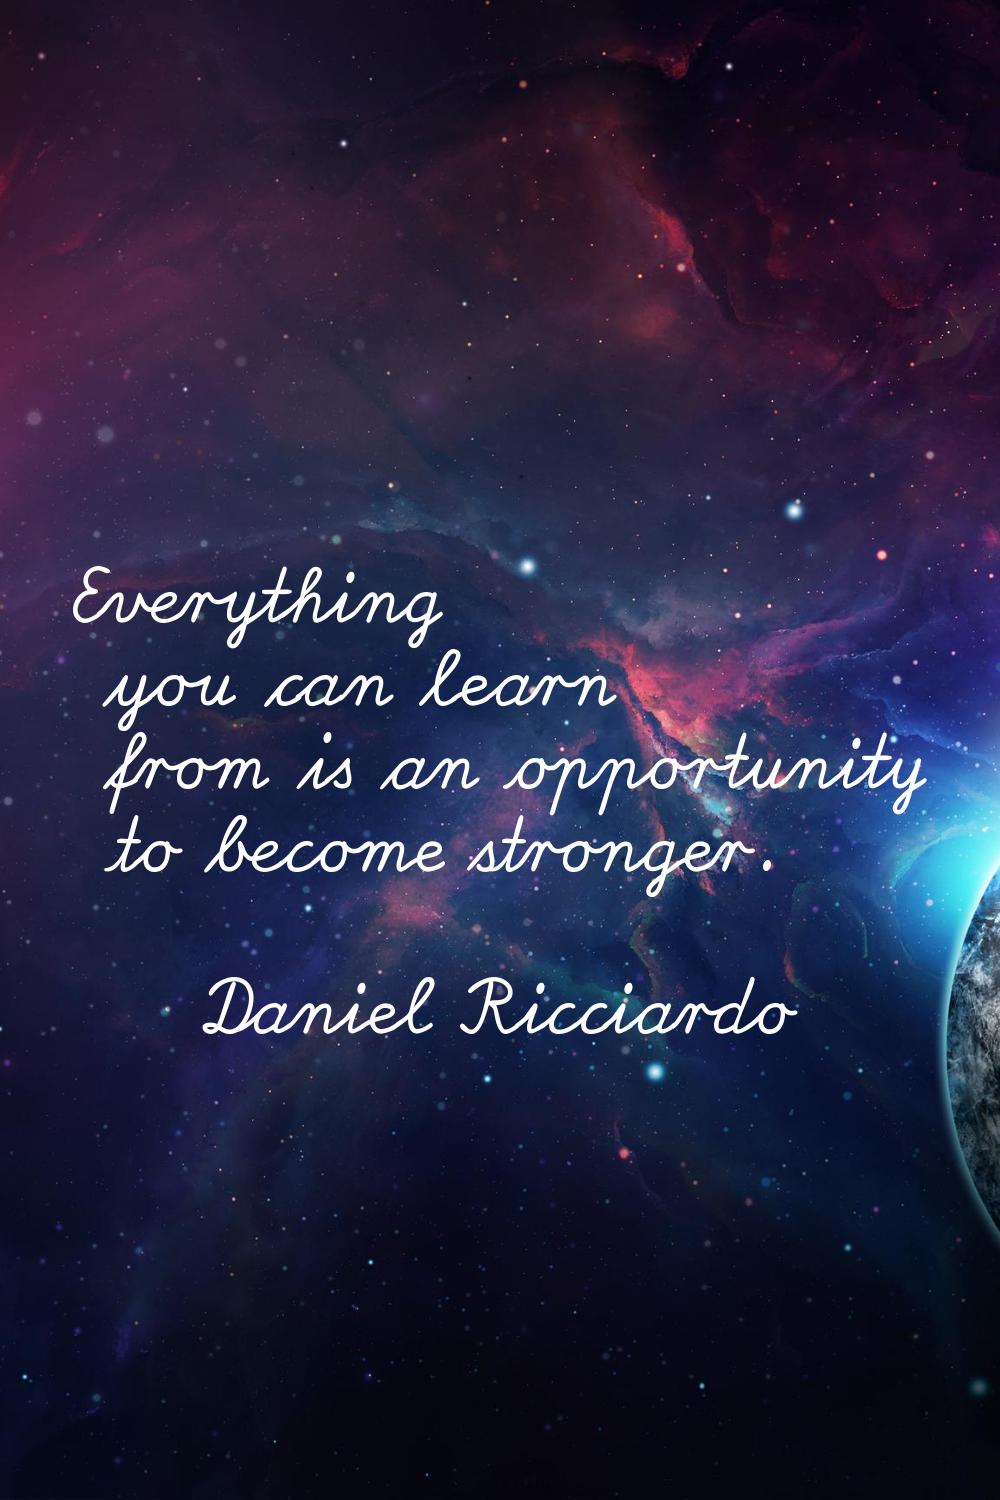 Everything you can learn from is an opportunity to become stronger.